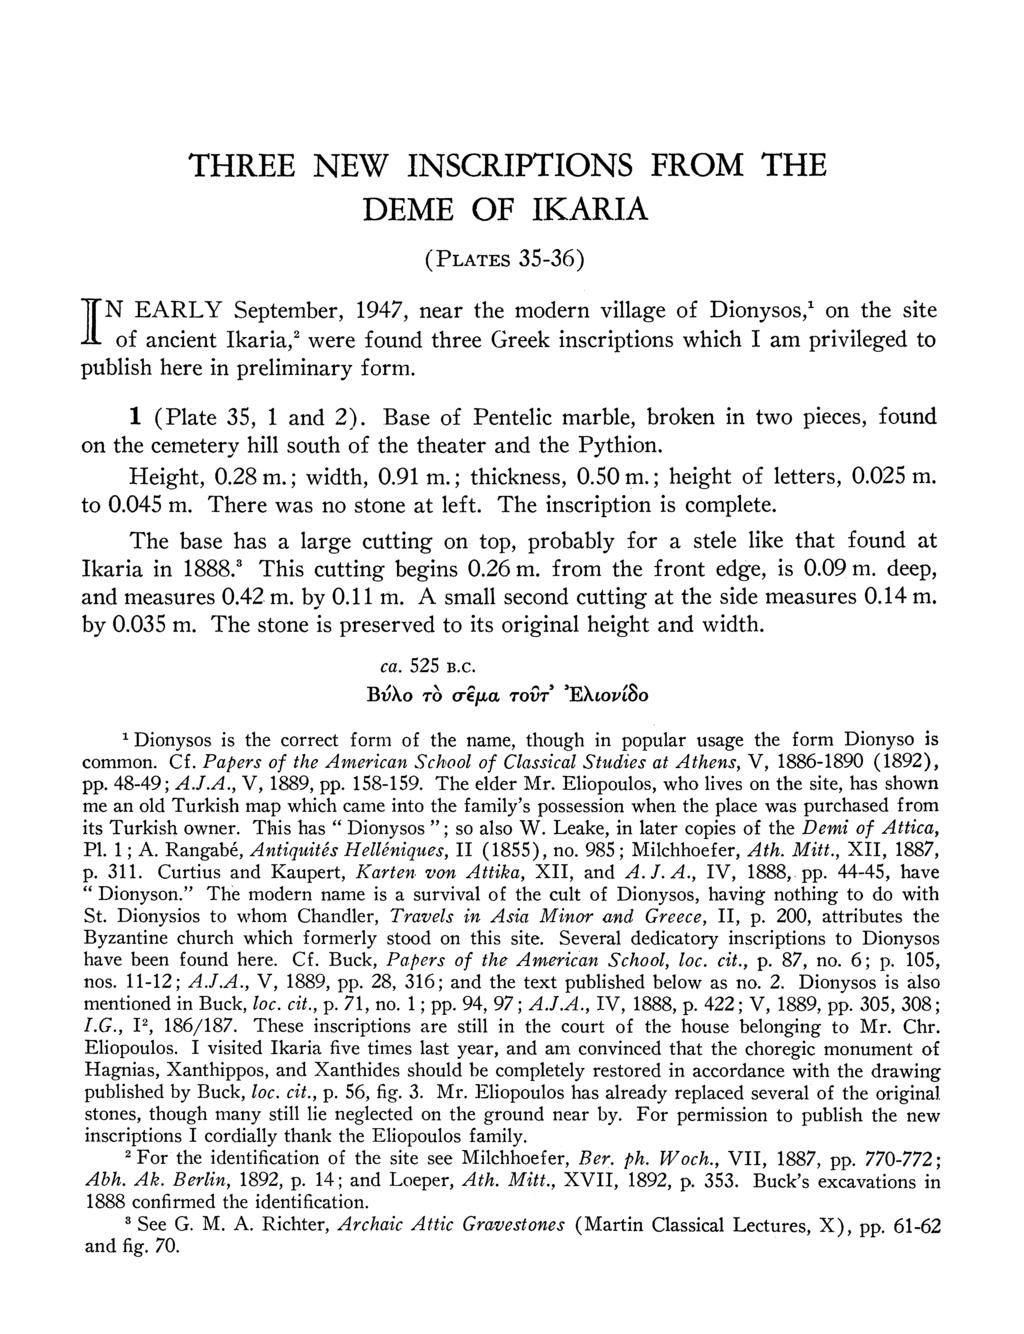 THREE NEW INSCRIPTIONS FROM THE DEME OF IKARIA (PLATES 35-36) IN EARLY September, 1947, near the modern village of Dionysos,' on the site of ancient Ikaria,2 were found three Greek inscriptions which